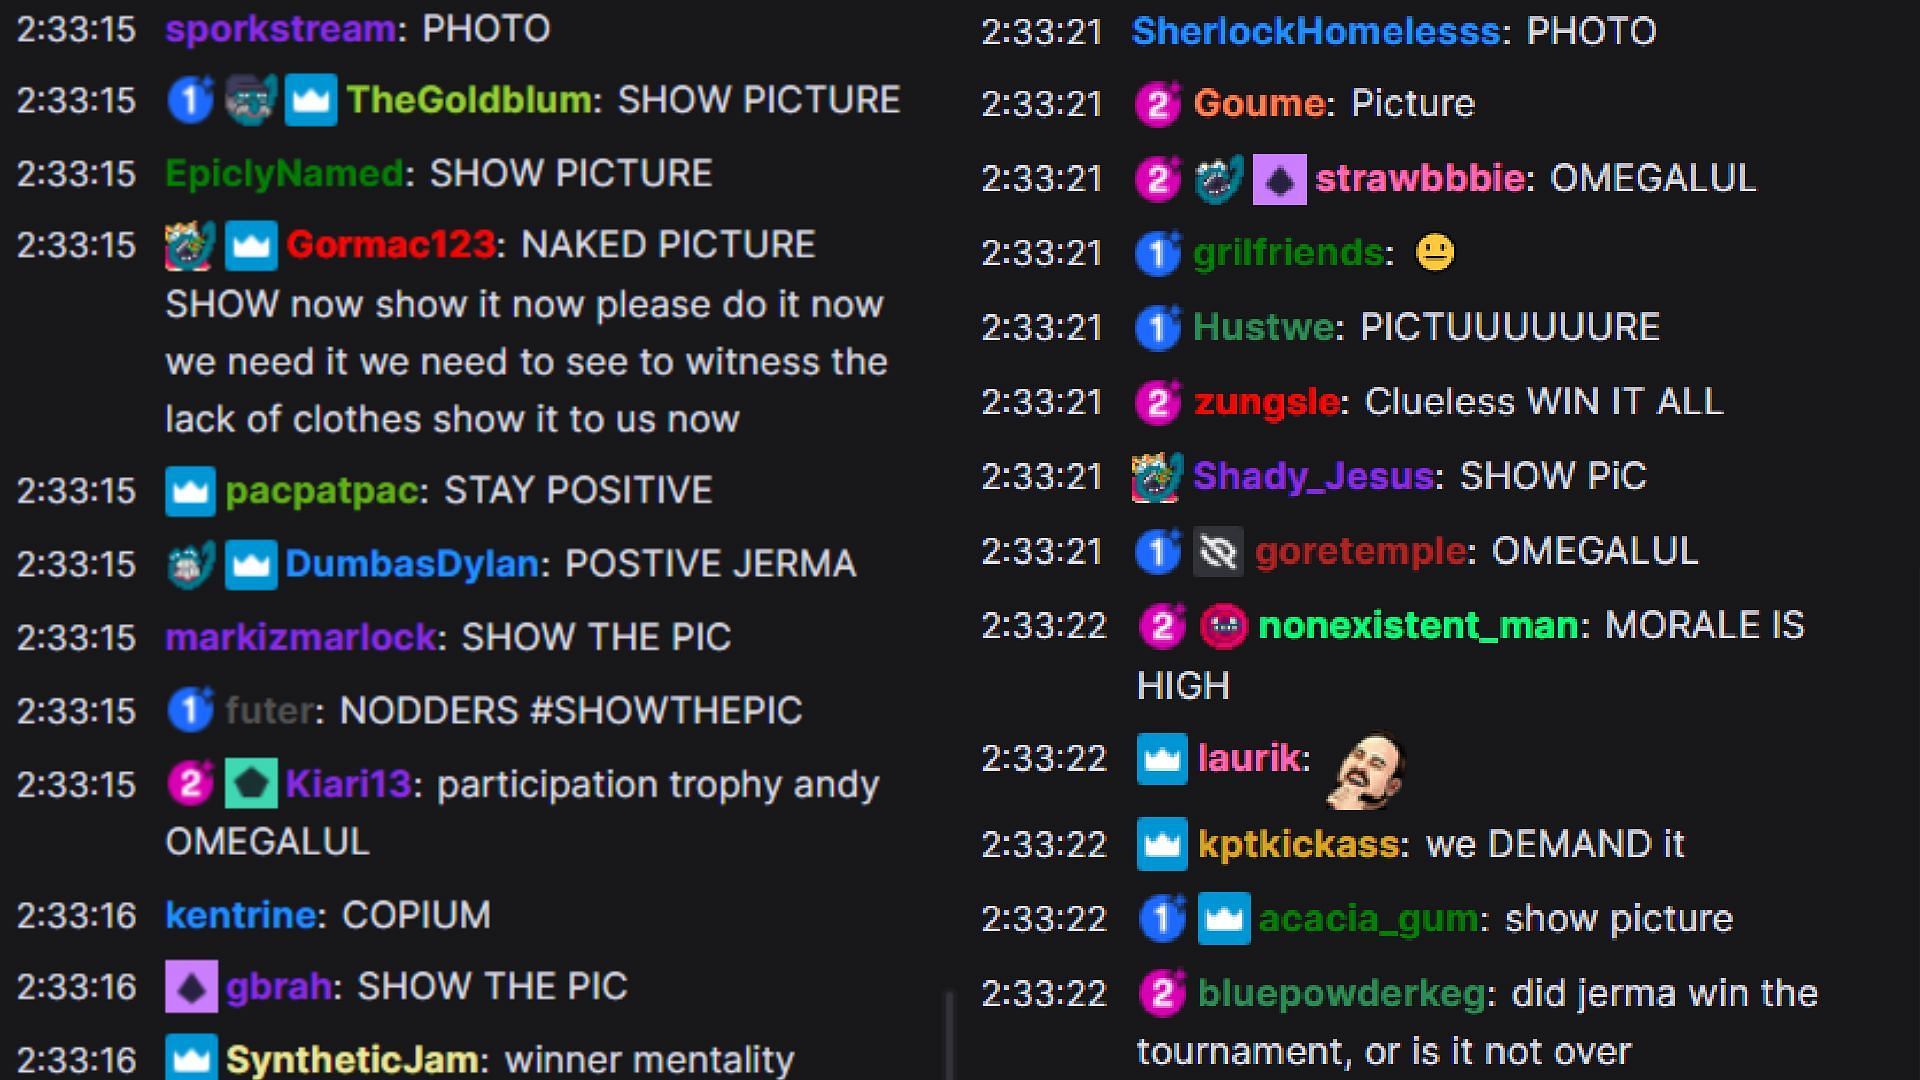 Chat wanting to see the pic (Image via his Twitch)